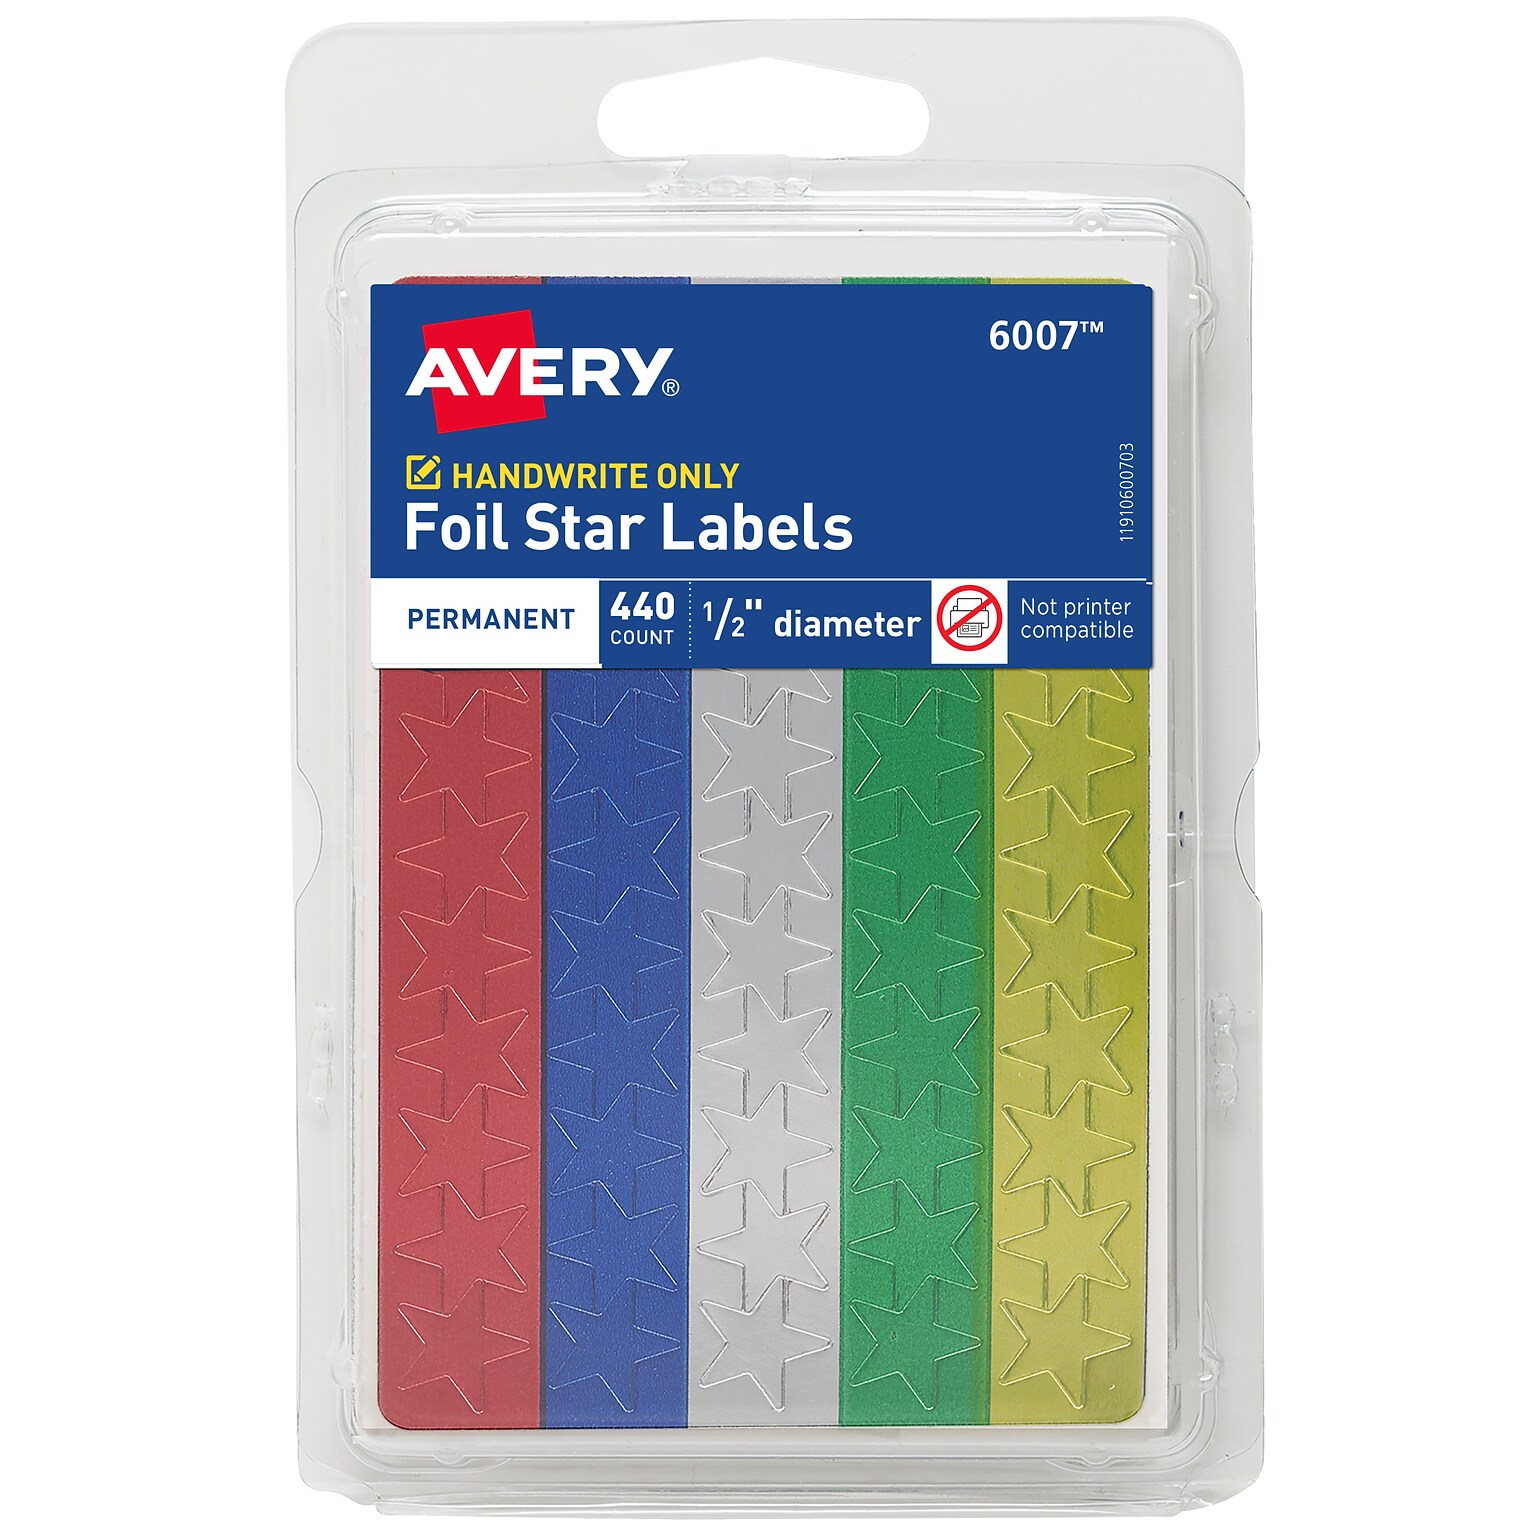 Avery Hand Written Identification & Color Coding Labels, 0.5Dia., Blue/Gold/Green/Red/Silver, 440/Pack (6007)